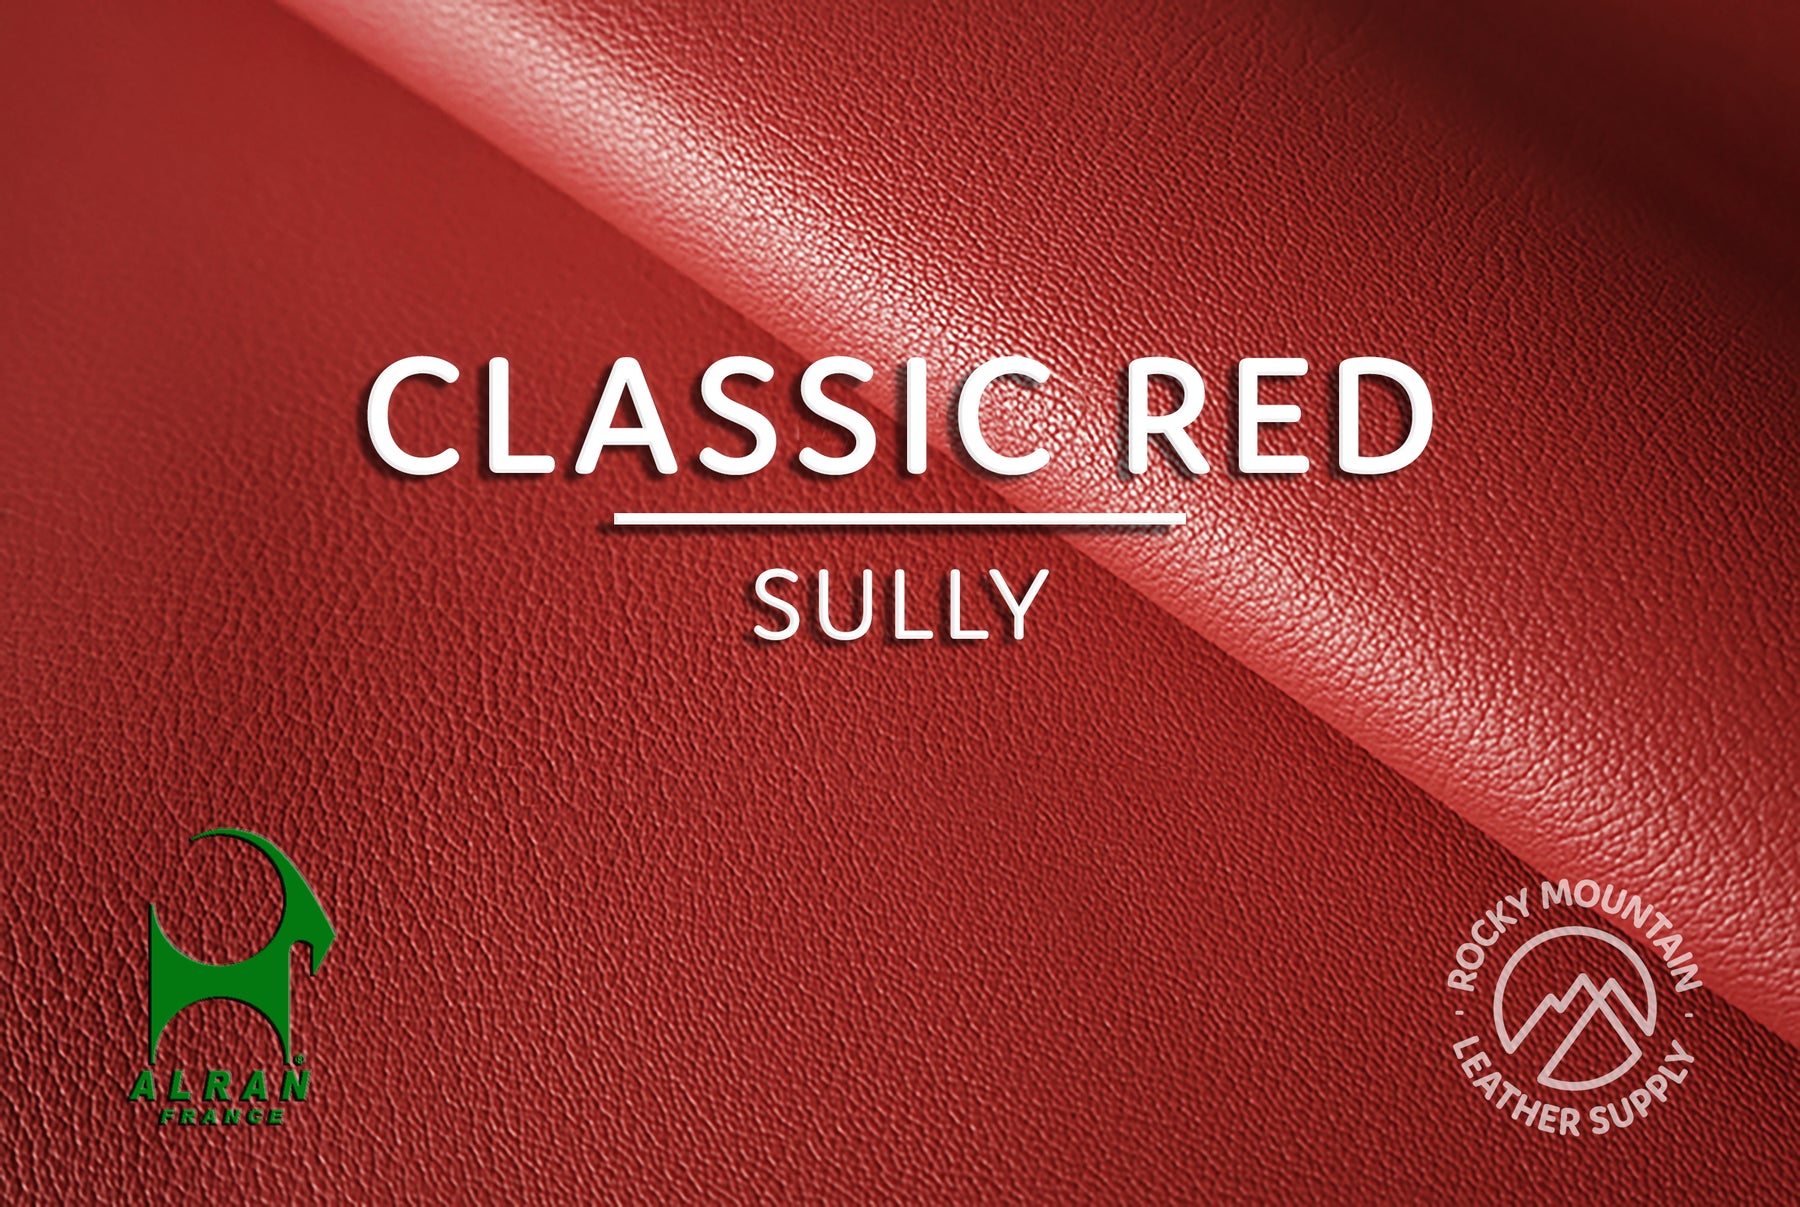 Alran 🇫🇷 - "Sully" Chevre Chagrin - Goat Leather (Reds/Oranges/Yellows)